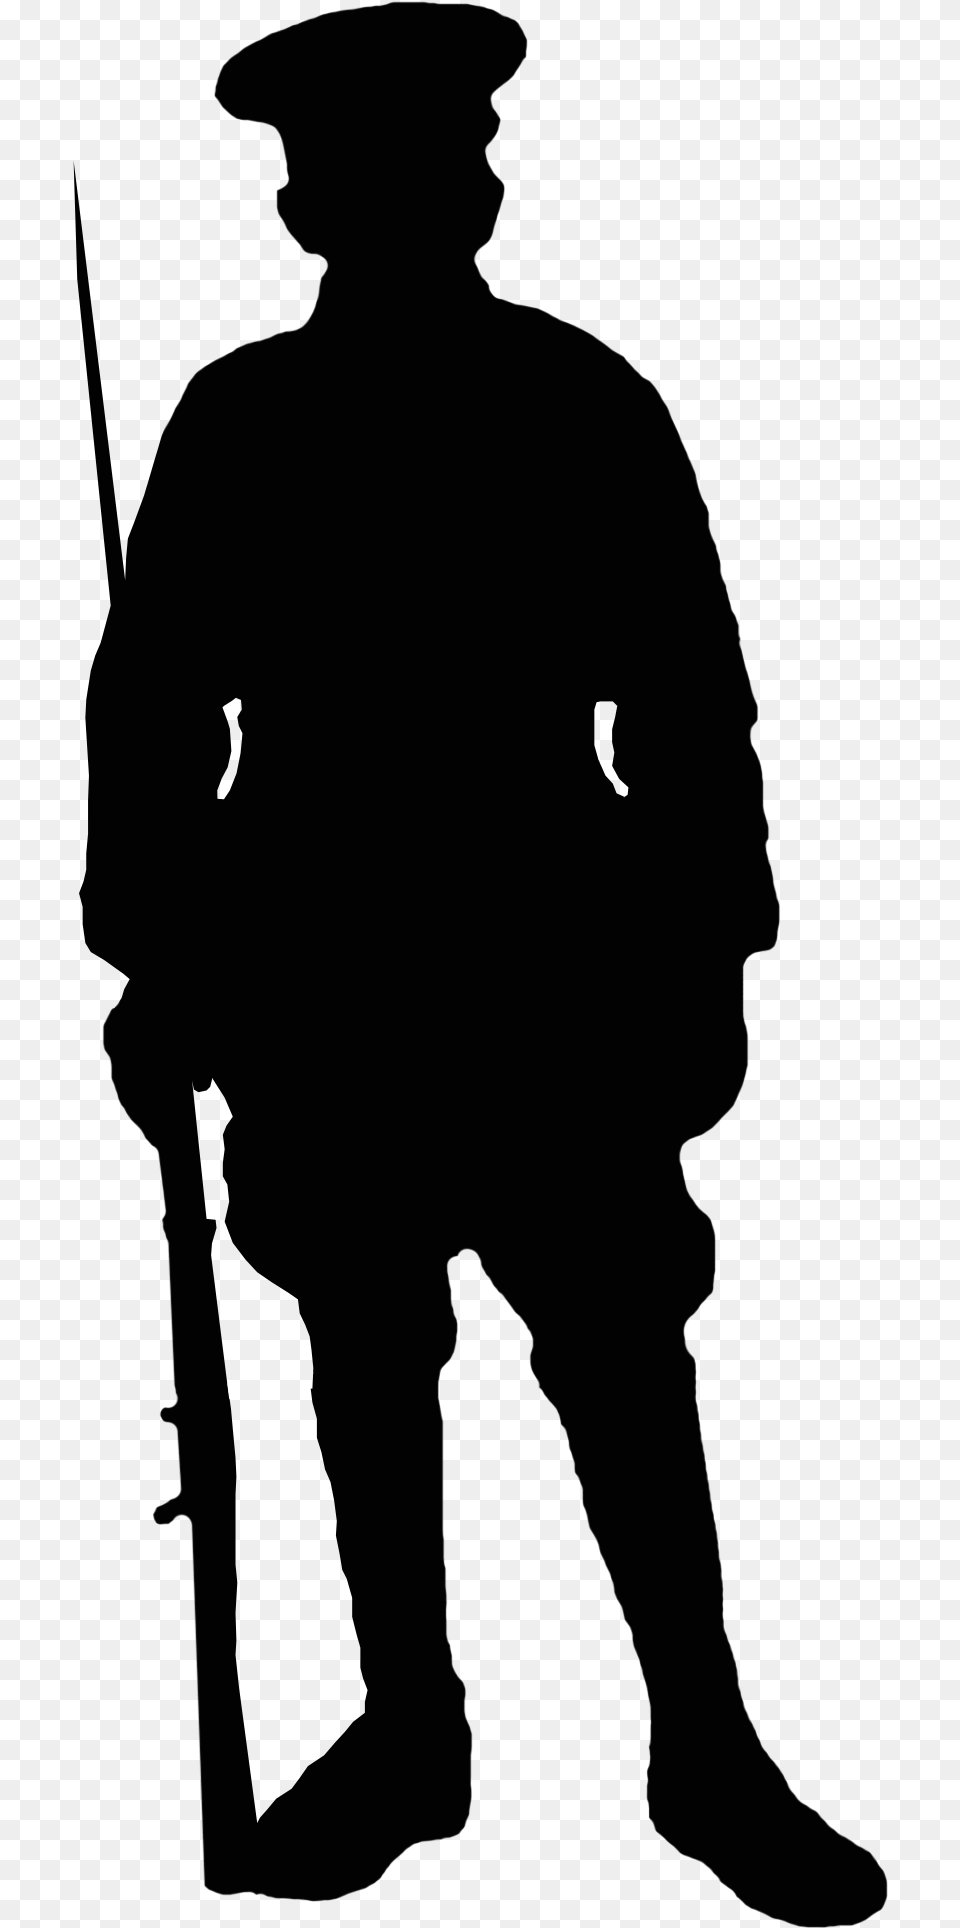 World War 1 Soldier Silhouette At Getdrawings World War 1 Soldier Silhouette, Jar, Pottery, Person Free Png